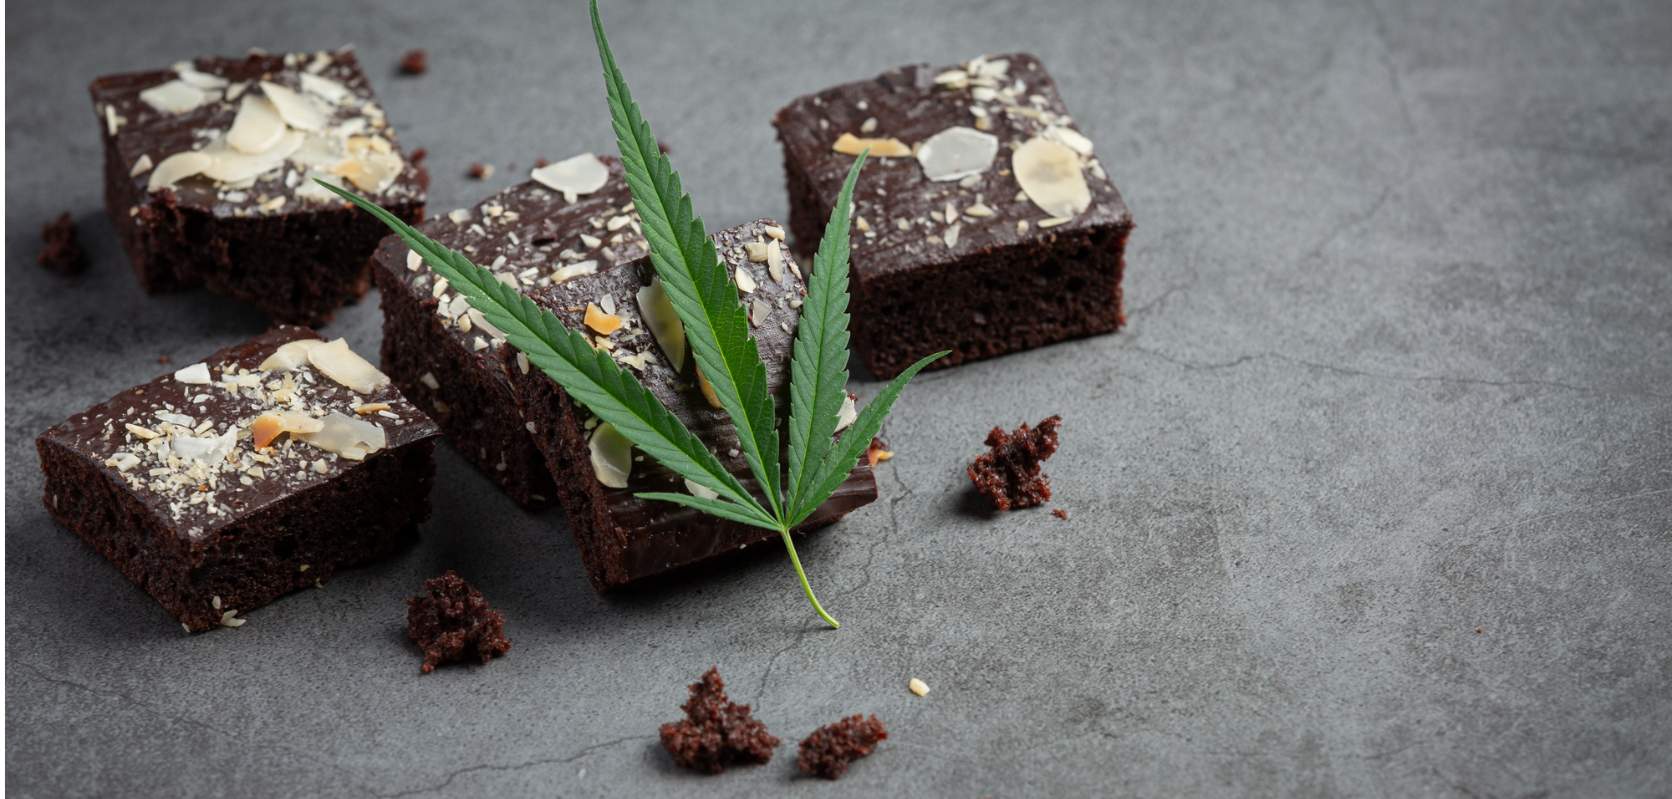 This guide will show you a step-by-step procedure for how to make weed brownies. But before that, we'll do some groundwork and discuss the most critical ingredient that makes weed brownies potent—cannabis infusion.